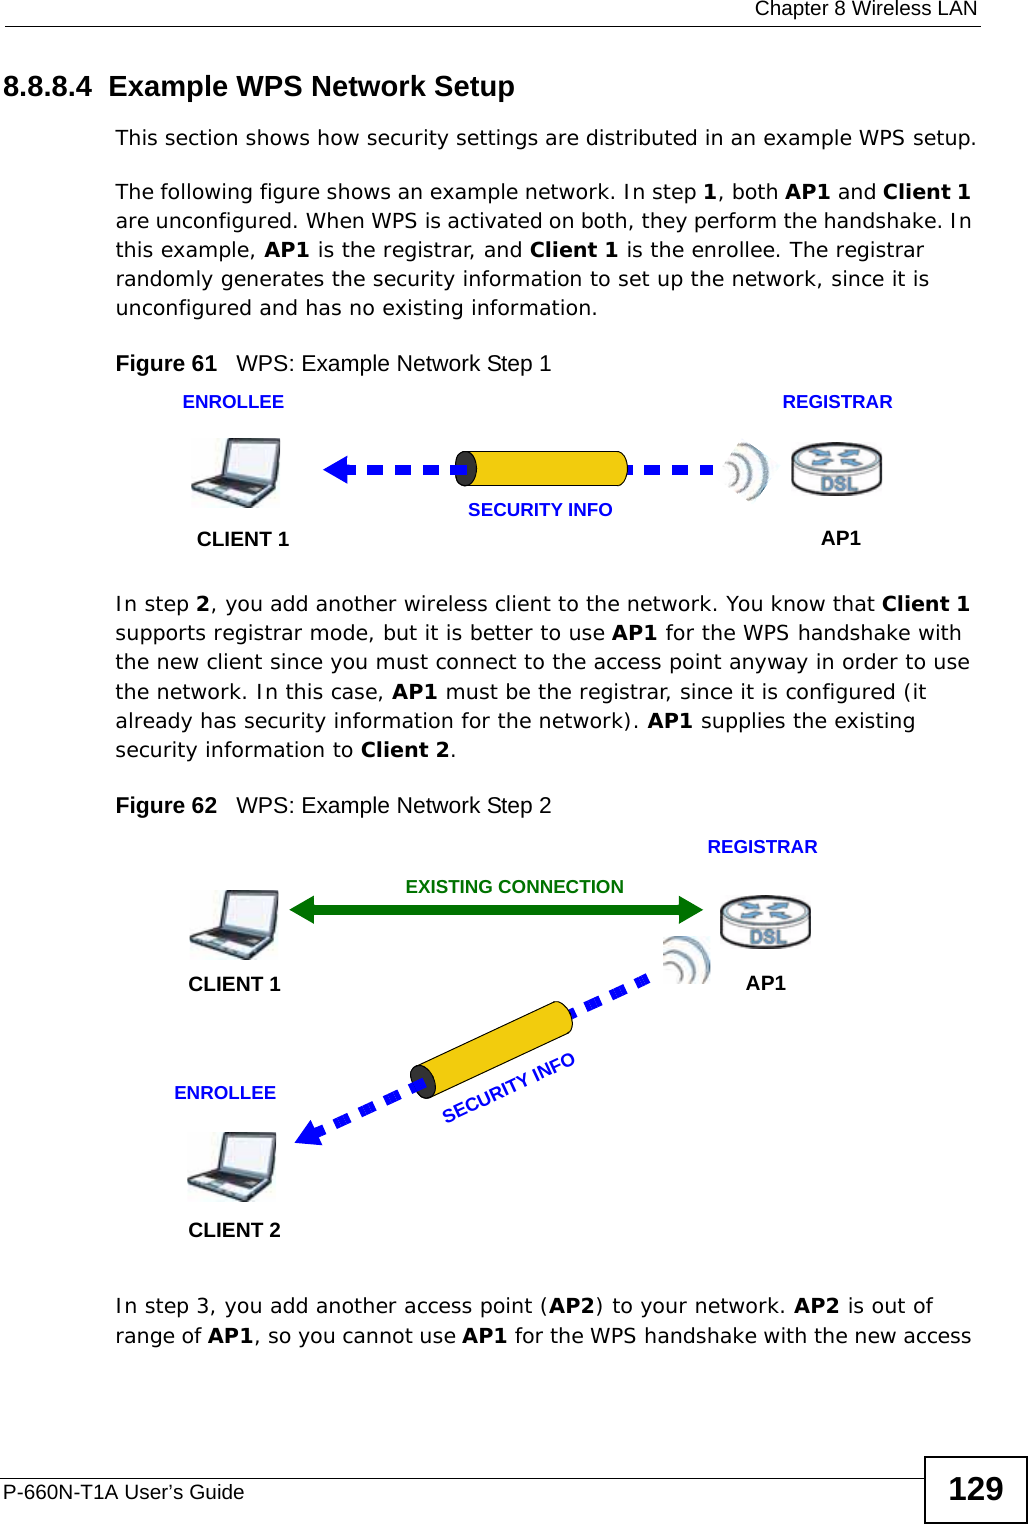  Chapter 8 Wireless LANP-660N-T1A User’s Guide 1298.8.8.4  Example WPS Network SetupThis section shows how security settings are distributed in an example WPS setup.The following figure shows an example network. In step 1, both AP1 and Client 1 are unconfigured. When WPS is activated on both, they perform the handshake. In this example, AP1 is the registrar, and Client 1 is the enrollee. The registrar randomly generates the security information to set up the network, since it is unconfigured and has no existing information.Figure 61   WPS: Example Network Step 1In step 2, you add another wireless client to the network. You know that Client 1 supports registrar mode, but it is better to use AP1 for the WPS handshake with the new client since you must connect to the access point anyway in order to use the network. In this case, AP1 must be the registrar, since it is configured (it already has security information for the network). AP1 supplies the existing security information to Client 2.Figure 62   WPS: Example Network Step 2In step 3, you add another access point (AP2) to your network. AP2 is out of range of AP1, so you cannot use AP1 for the WPS handshake with the new access REGISTRARENROLLEESECURITY INFOCLIENT 1 AP1REGISTRARCLIENT 1 AP1ENROLLEECLIENT 2EXISTING CONNECTIONSECURITY INFO